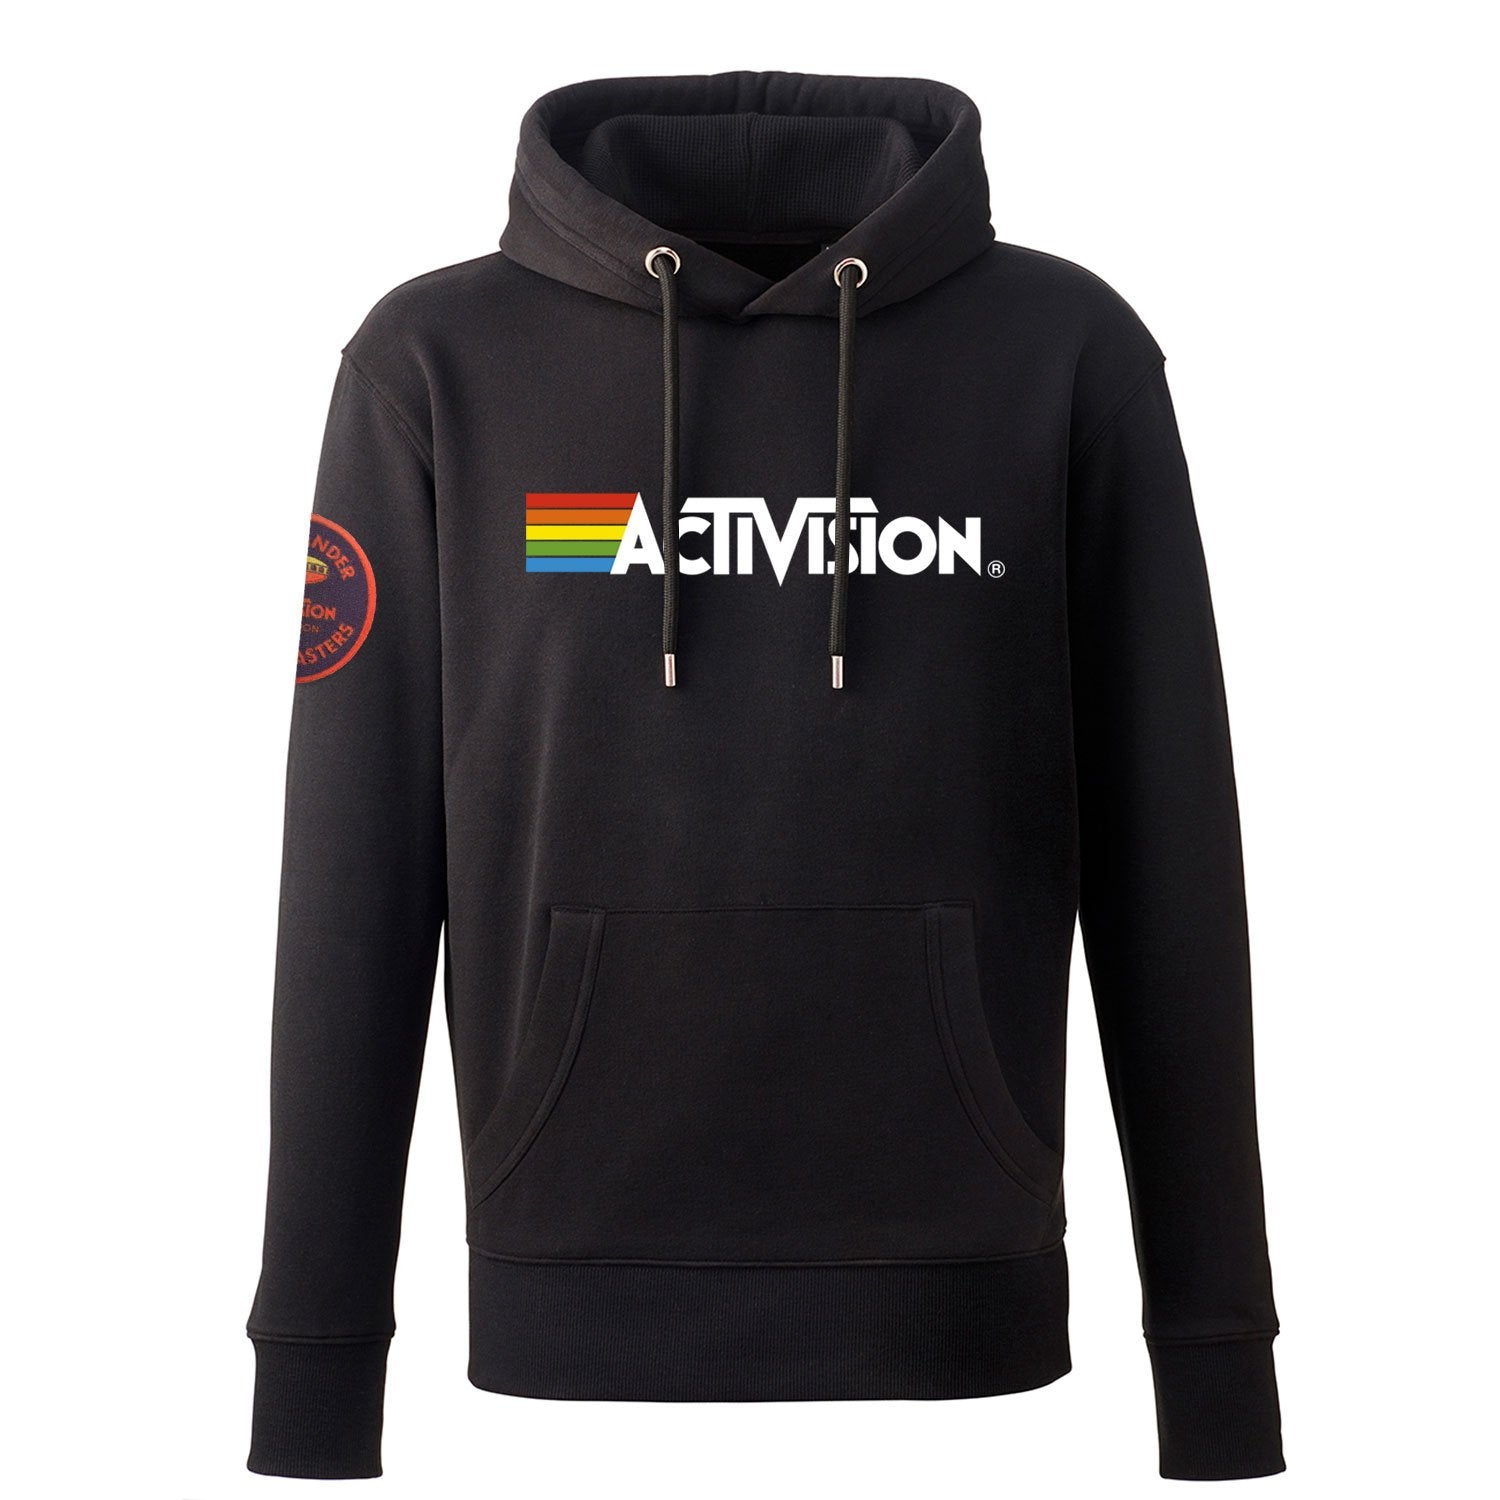 Laser Blasters Commander Patch, Activision Logo Men's Hoody, Black Pullover in Unisex Fit with Kangaroo Pocket